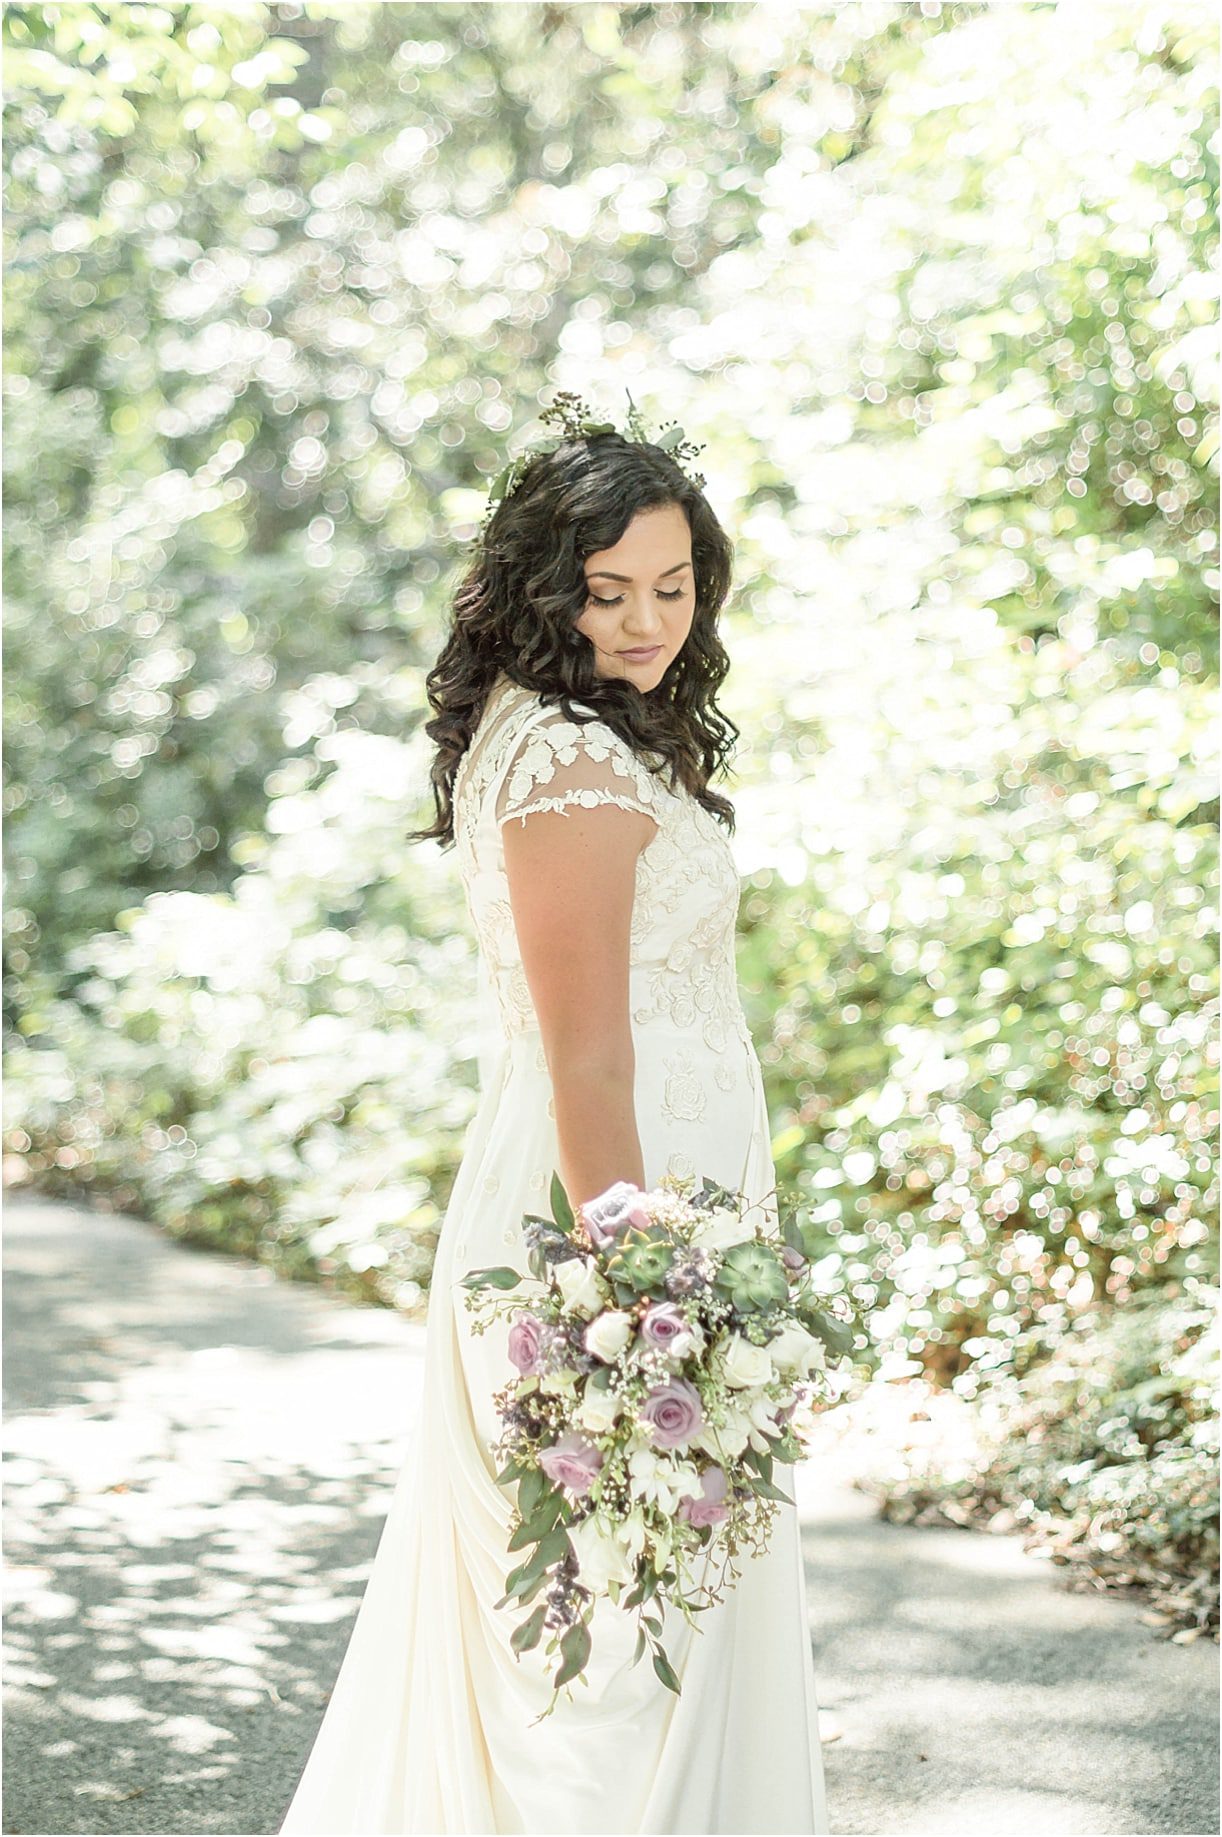 Interracial Lavender Richmond Virginia Wedding as seen on Hill City Bride Blog by Demi Mabry Photography hair makeup dress gown